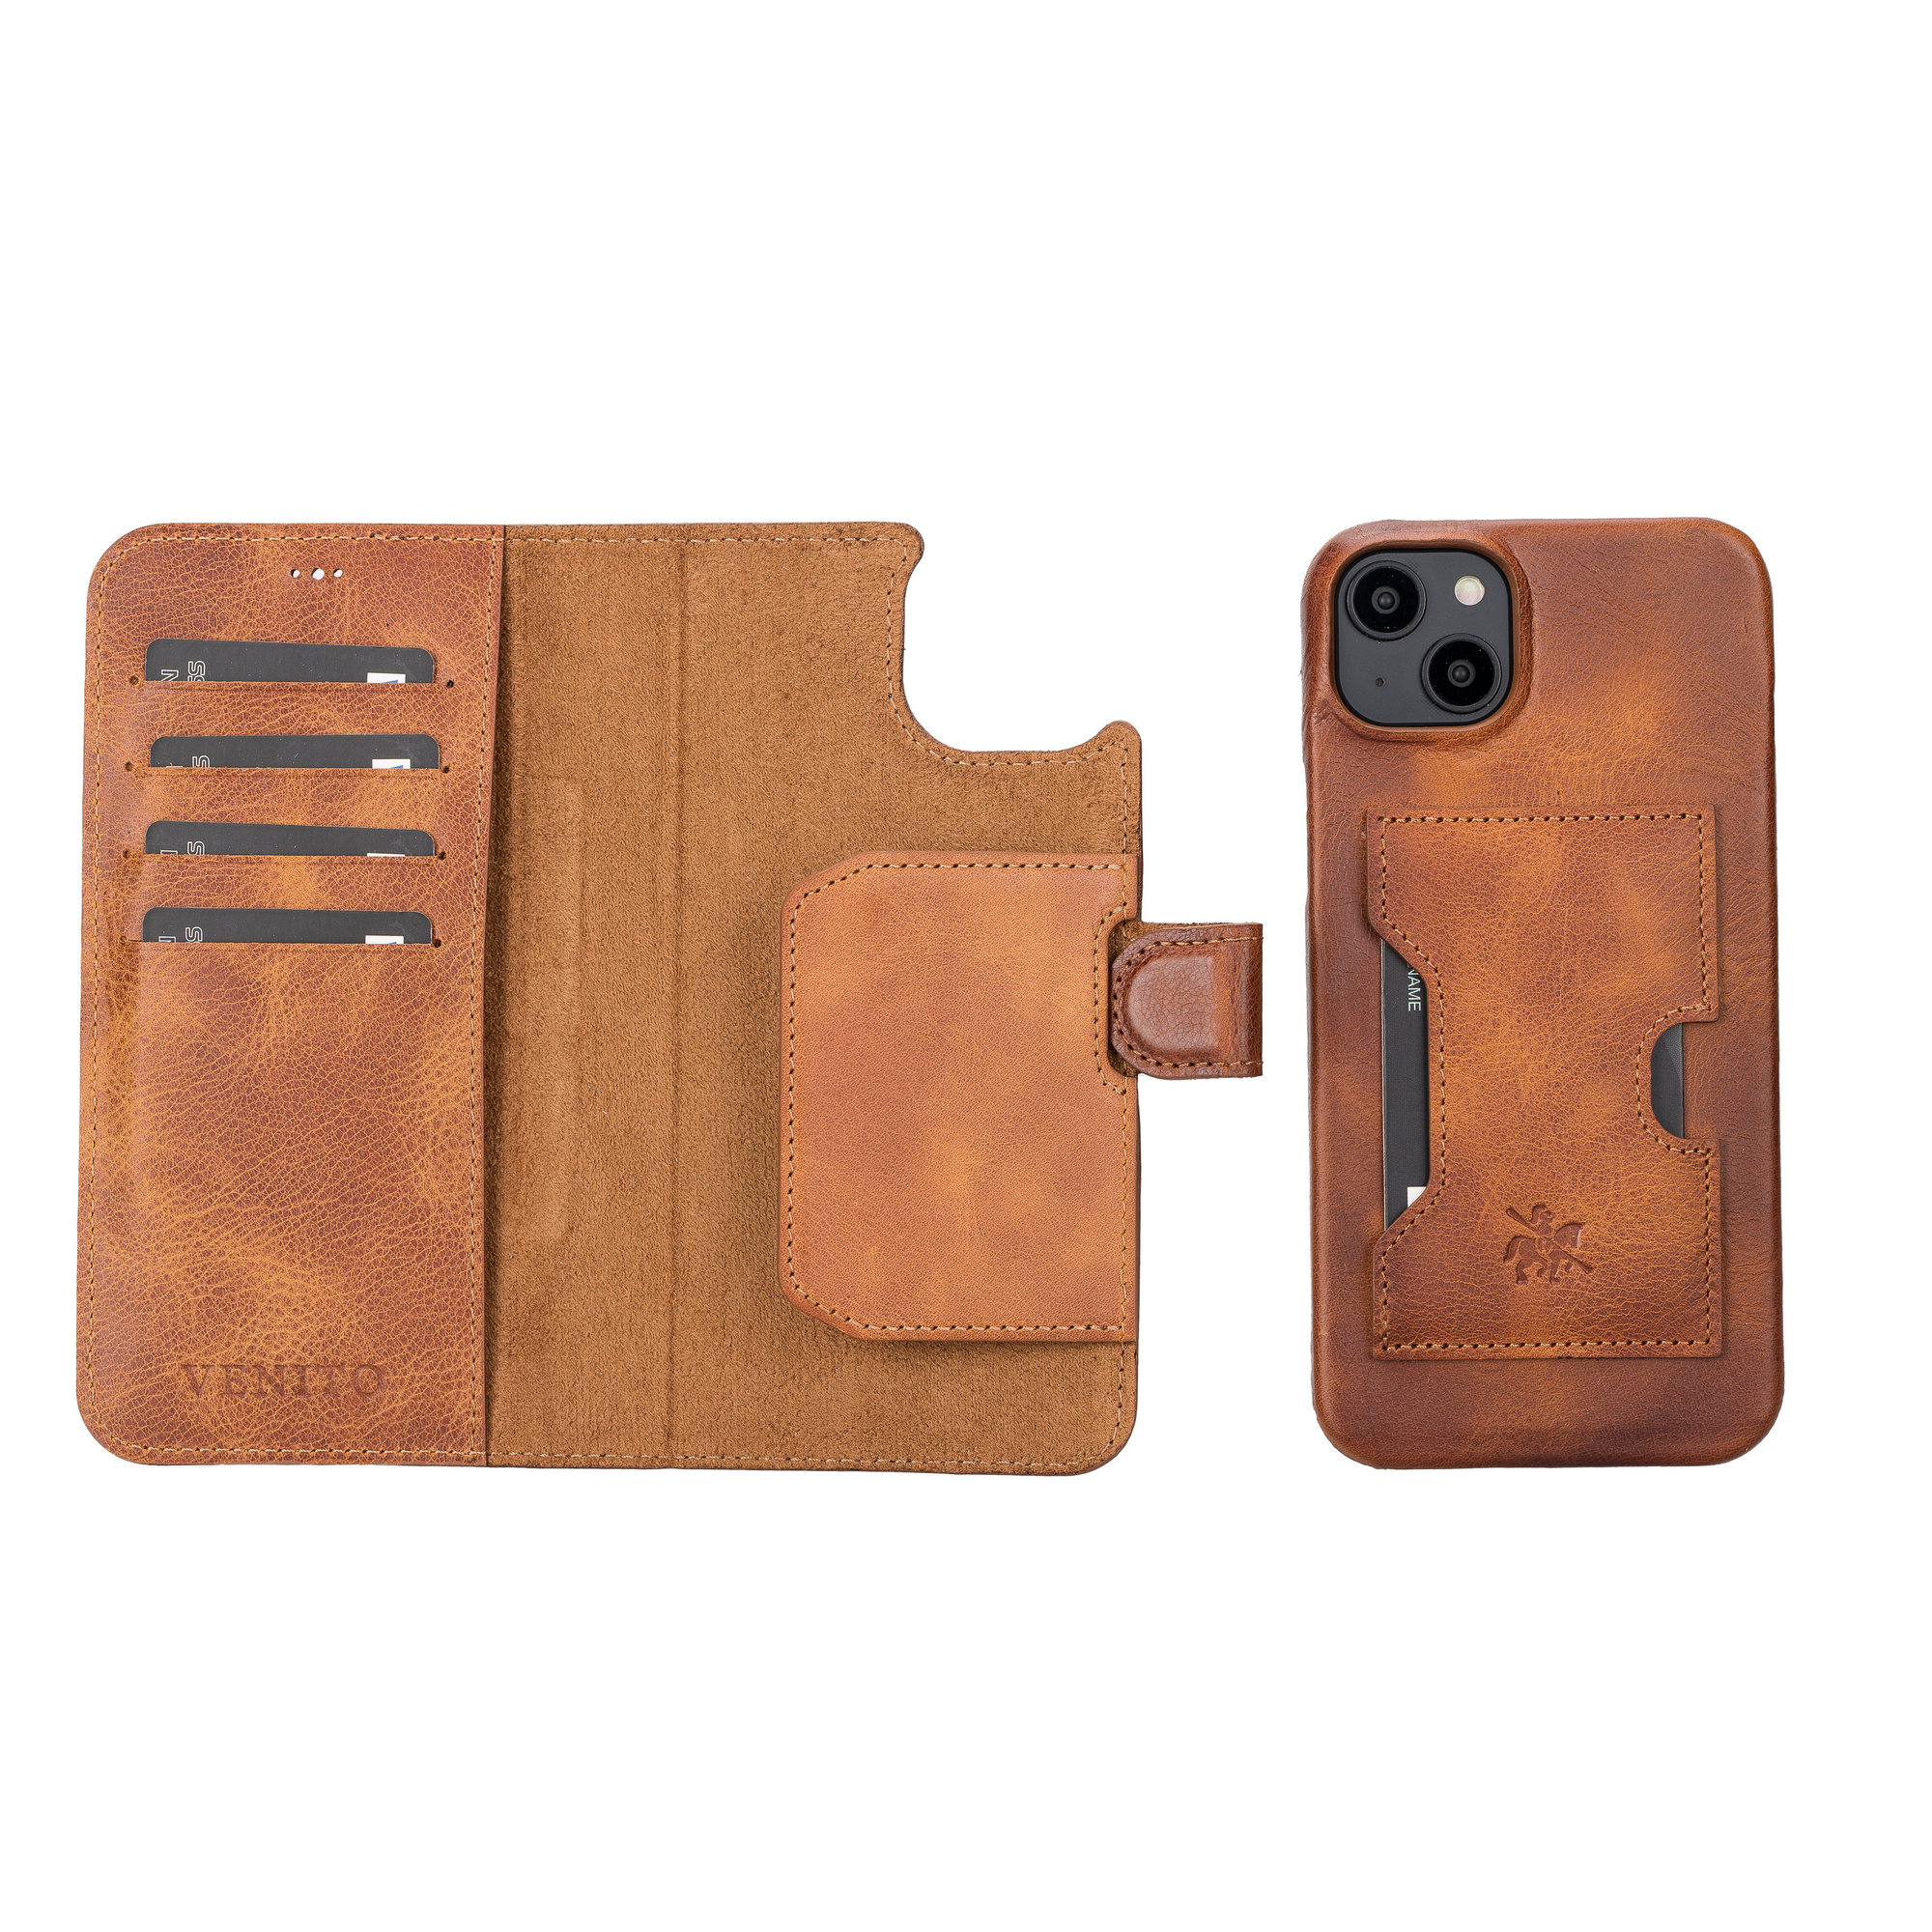 HR Wireless Apple iPhone 14 6.1 - Multi-functional Cards Slot Wrist Strap Vegan Leather Case Cover - Brown